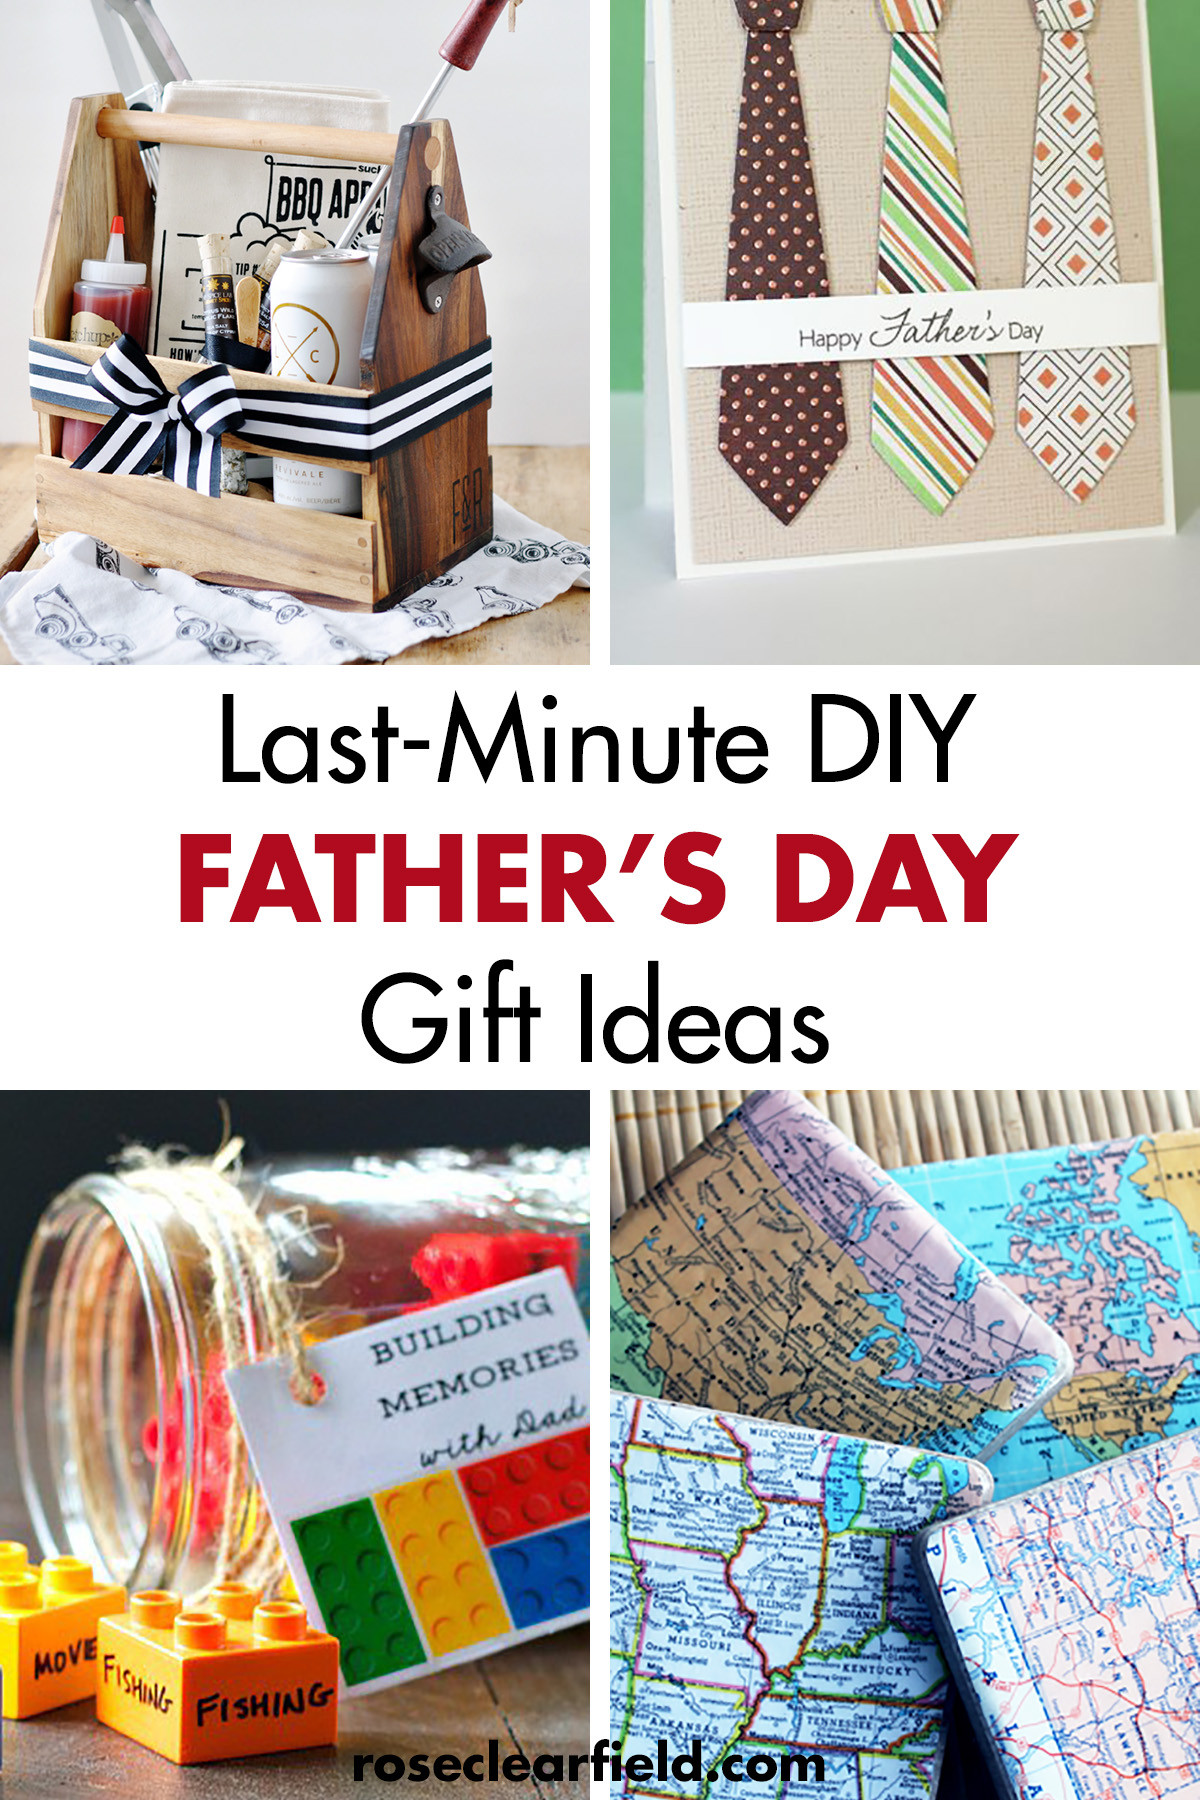 Fathers Day Gift Ideas Diy
 Last Minute DIY Father s Day Gift Ideas • Rose Clearfield